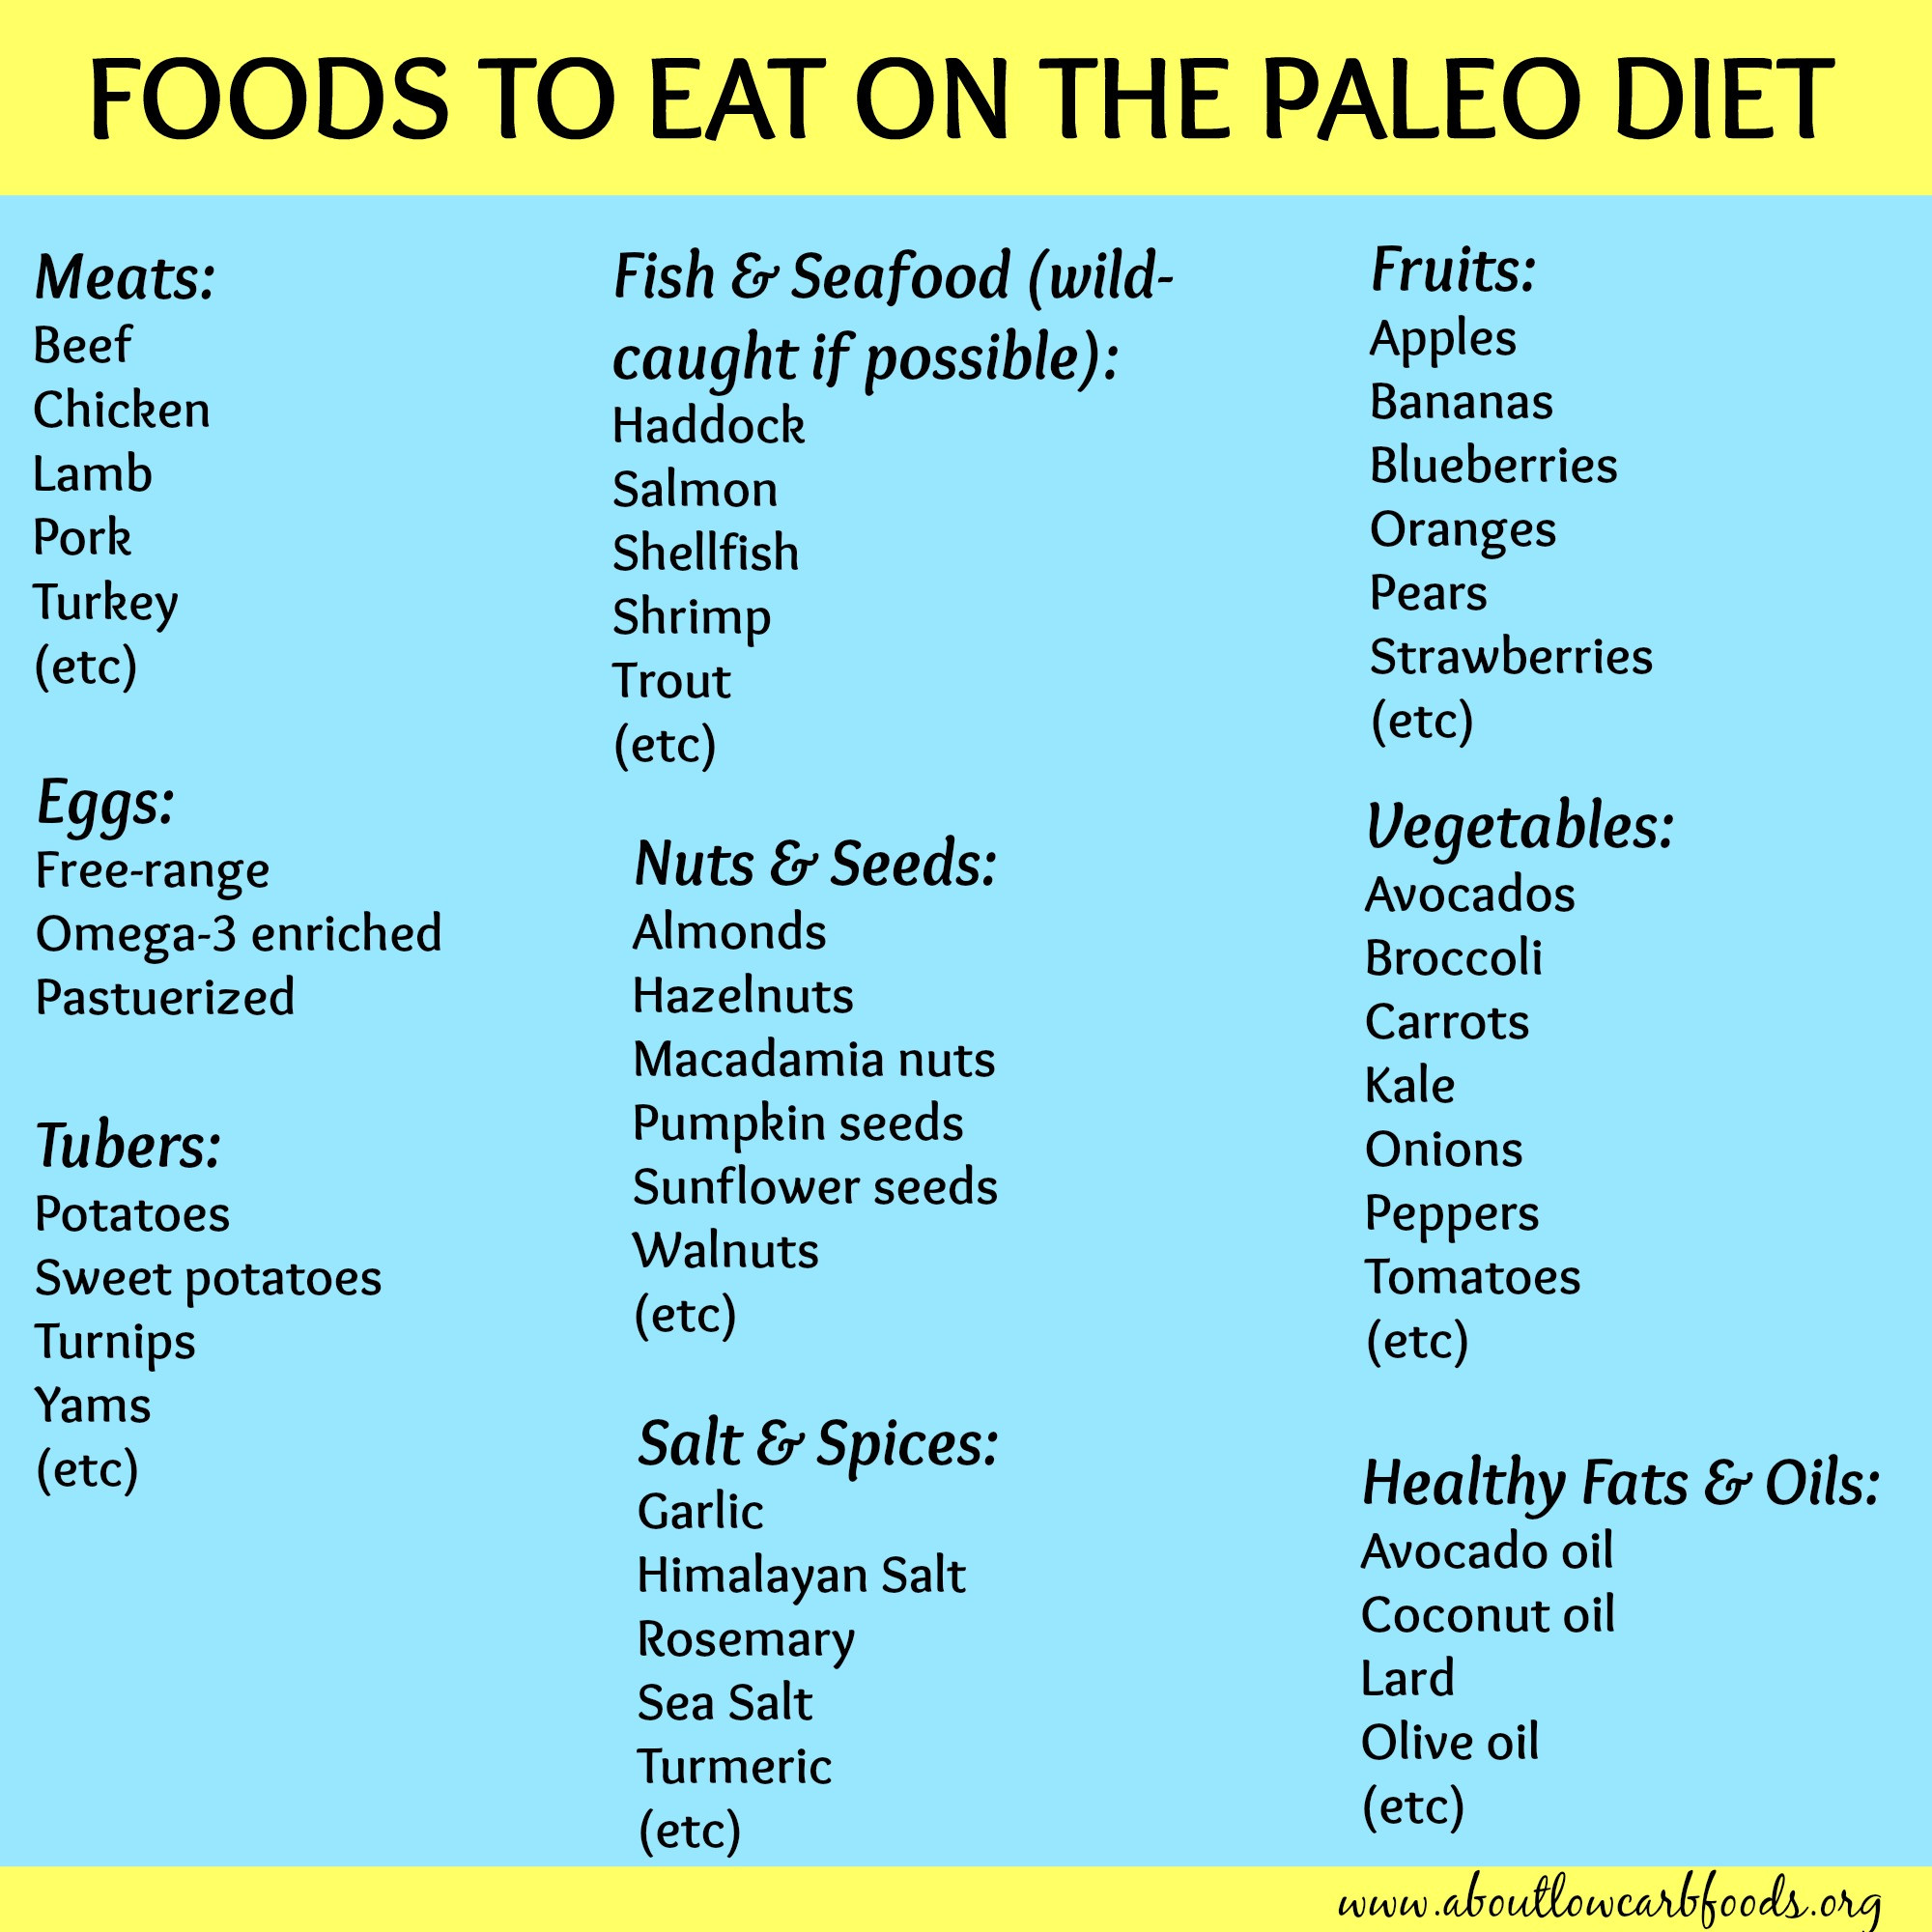 Paleo Diet Menu Plan
 Paleo Diet Meal Plan Why It’s So Popular About Low Carb